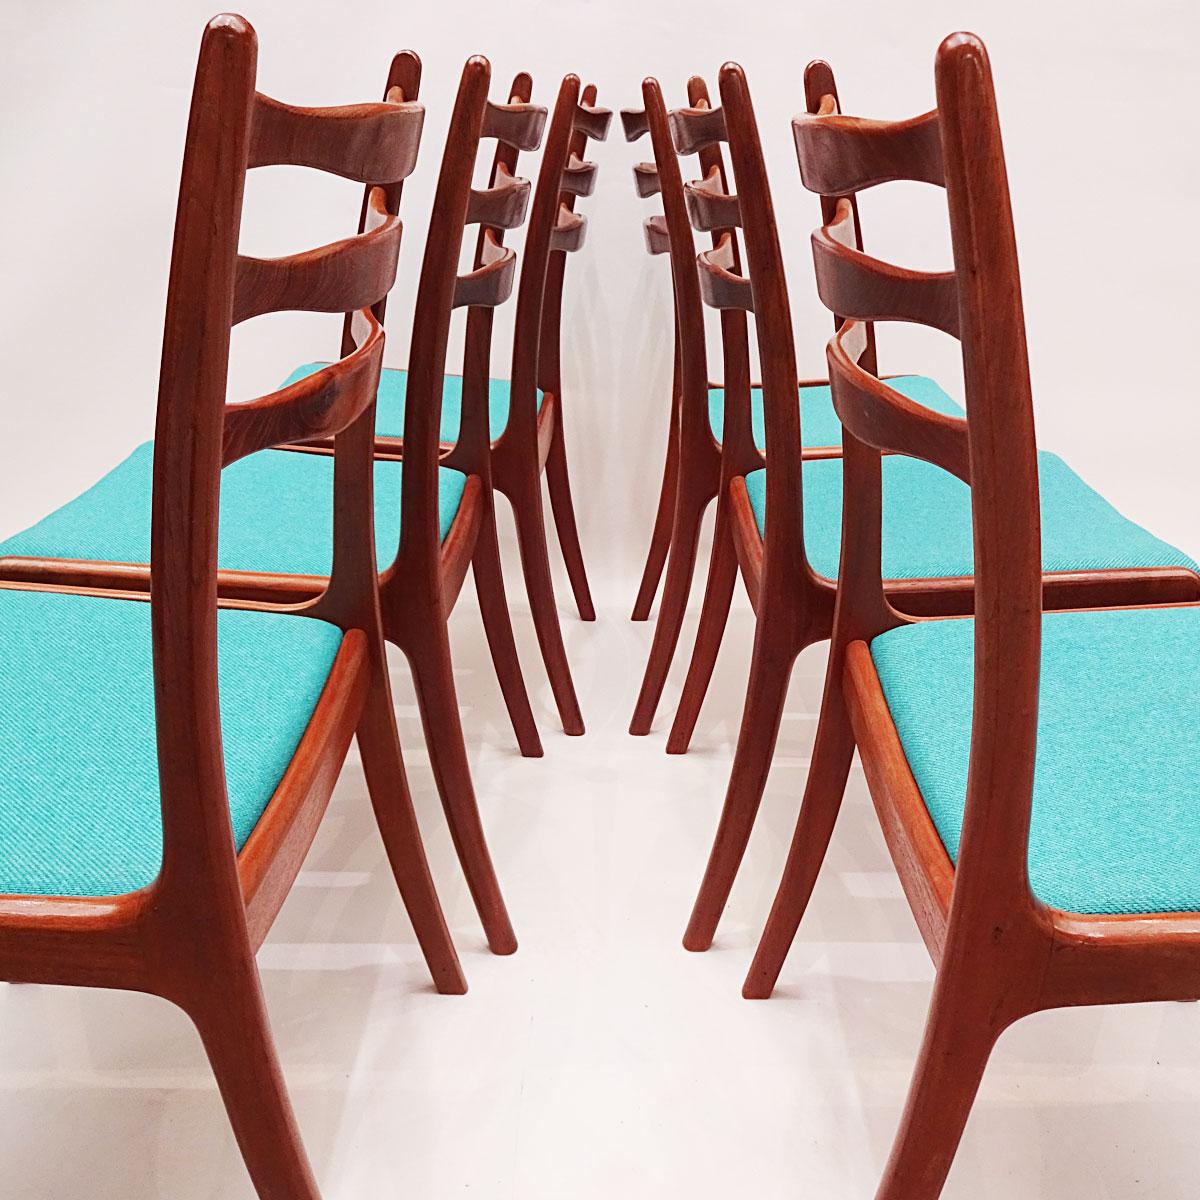 Unfortunately very little is known about SOS other than they were a Danish furniture producer from the 1960s and 1970s. These ladder back chairs show quality in design and manufacturer and feature gentle curves in the leg structure and in particular